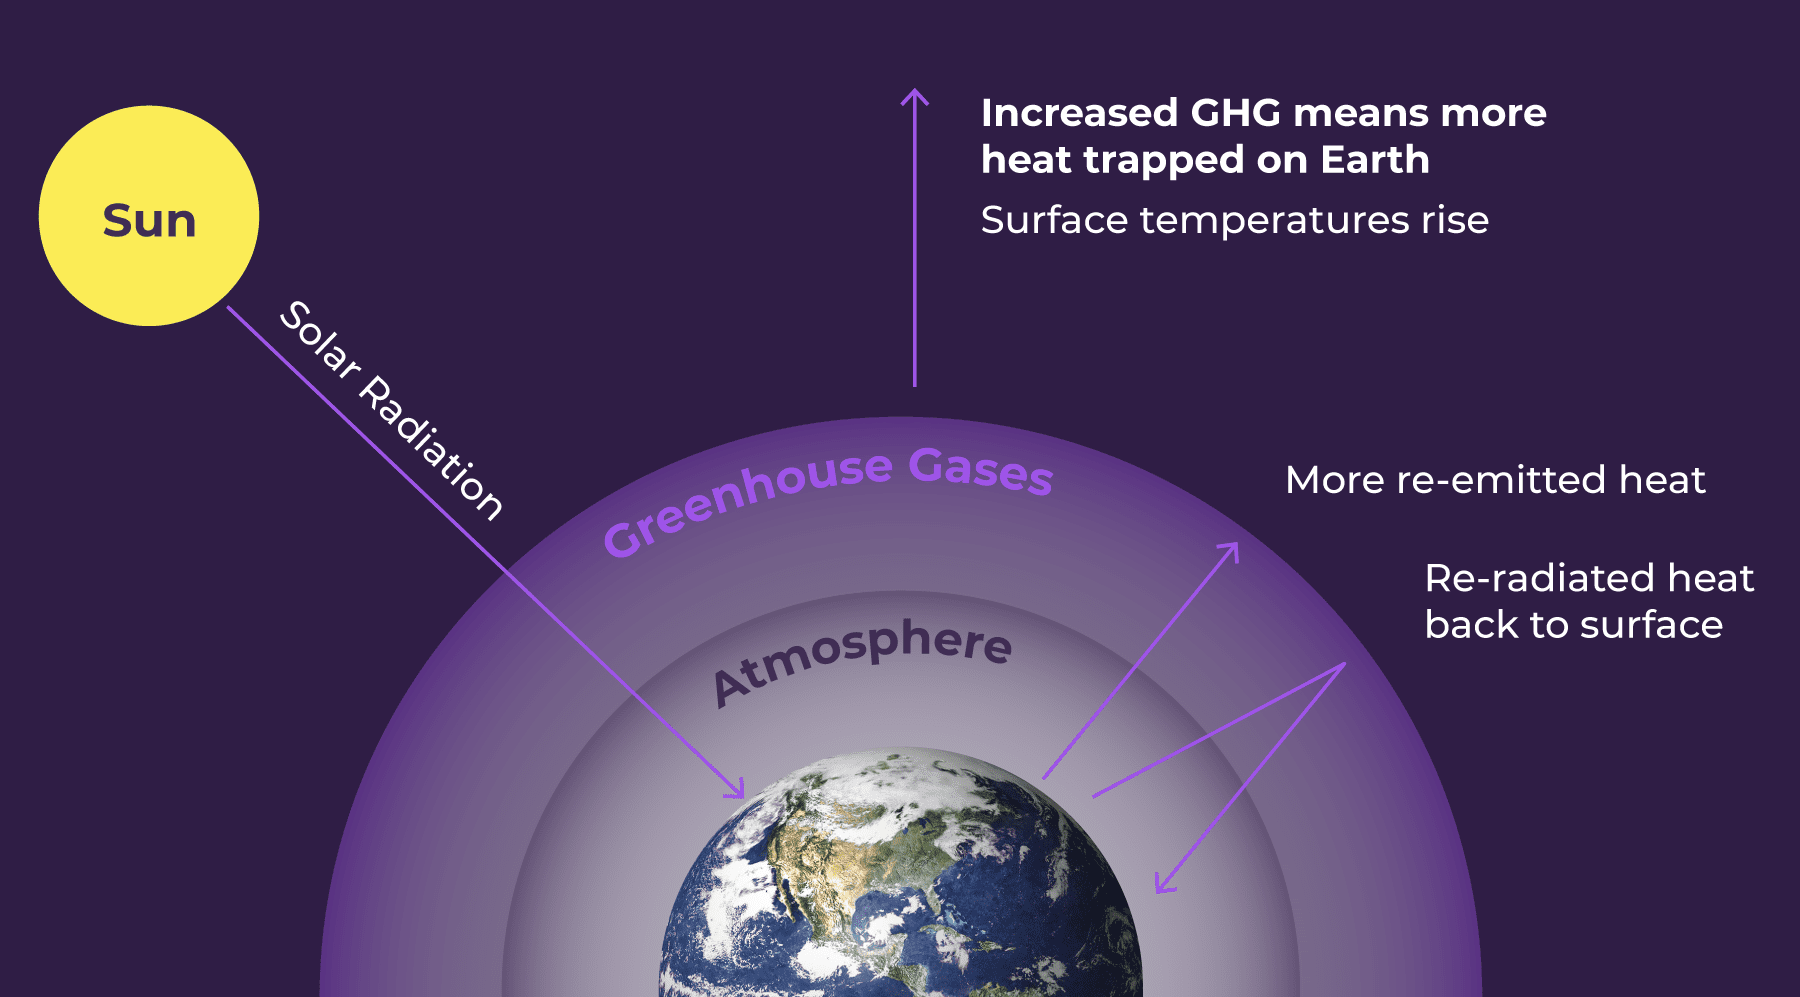 Increased greenhouse gas emissions mean more heat trapped on Earth